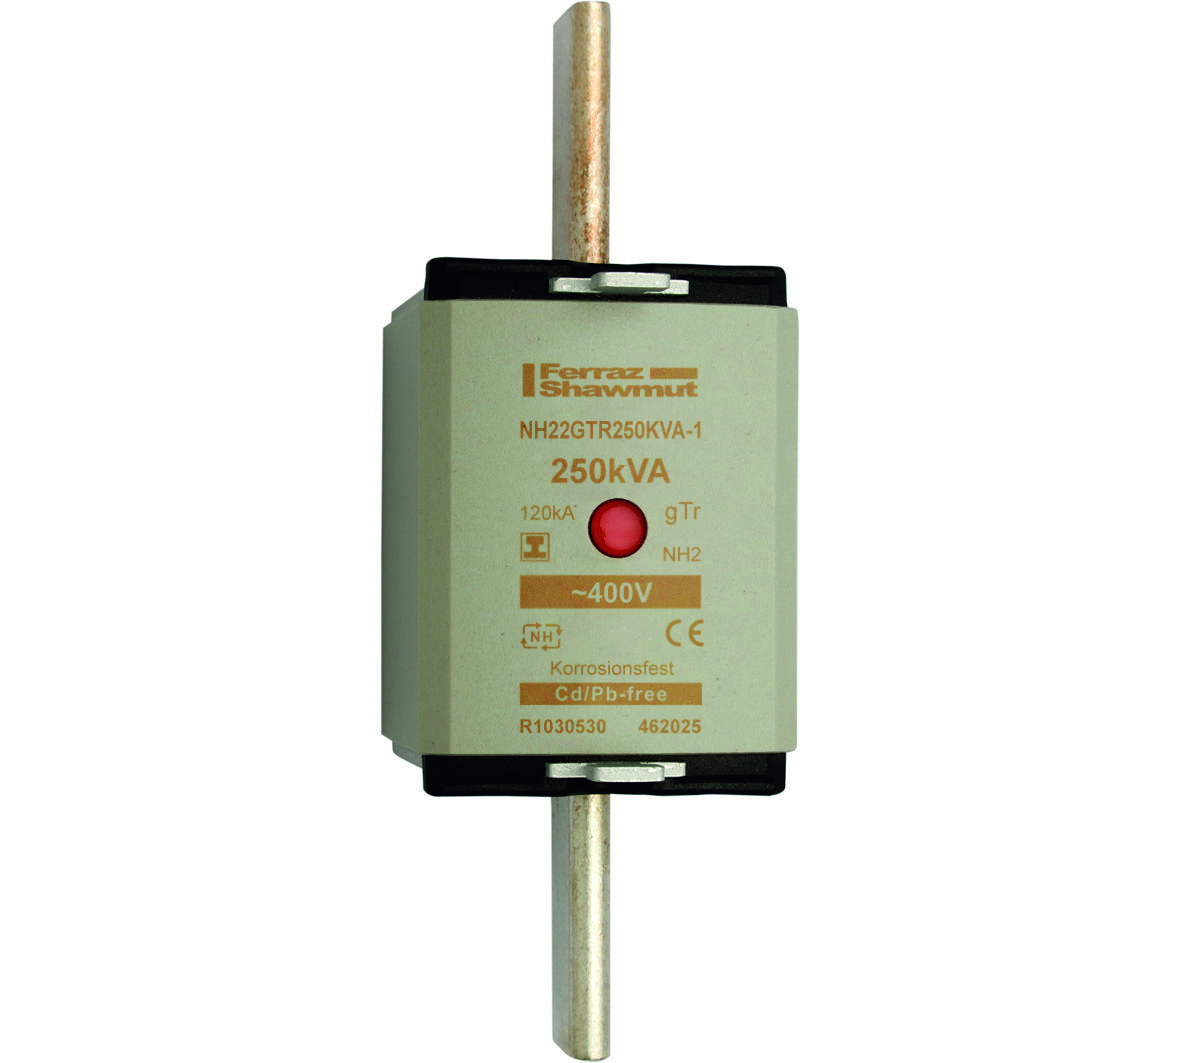 R1030530 - NH fuse-link gTr, 400VAC, size 2, 250KVA, centre indicator/insulated tags